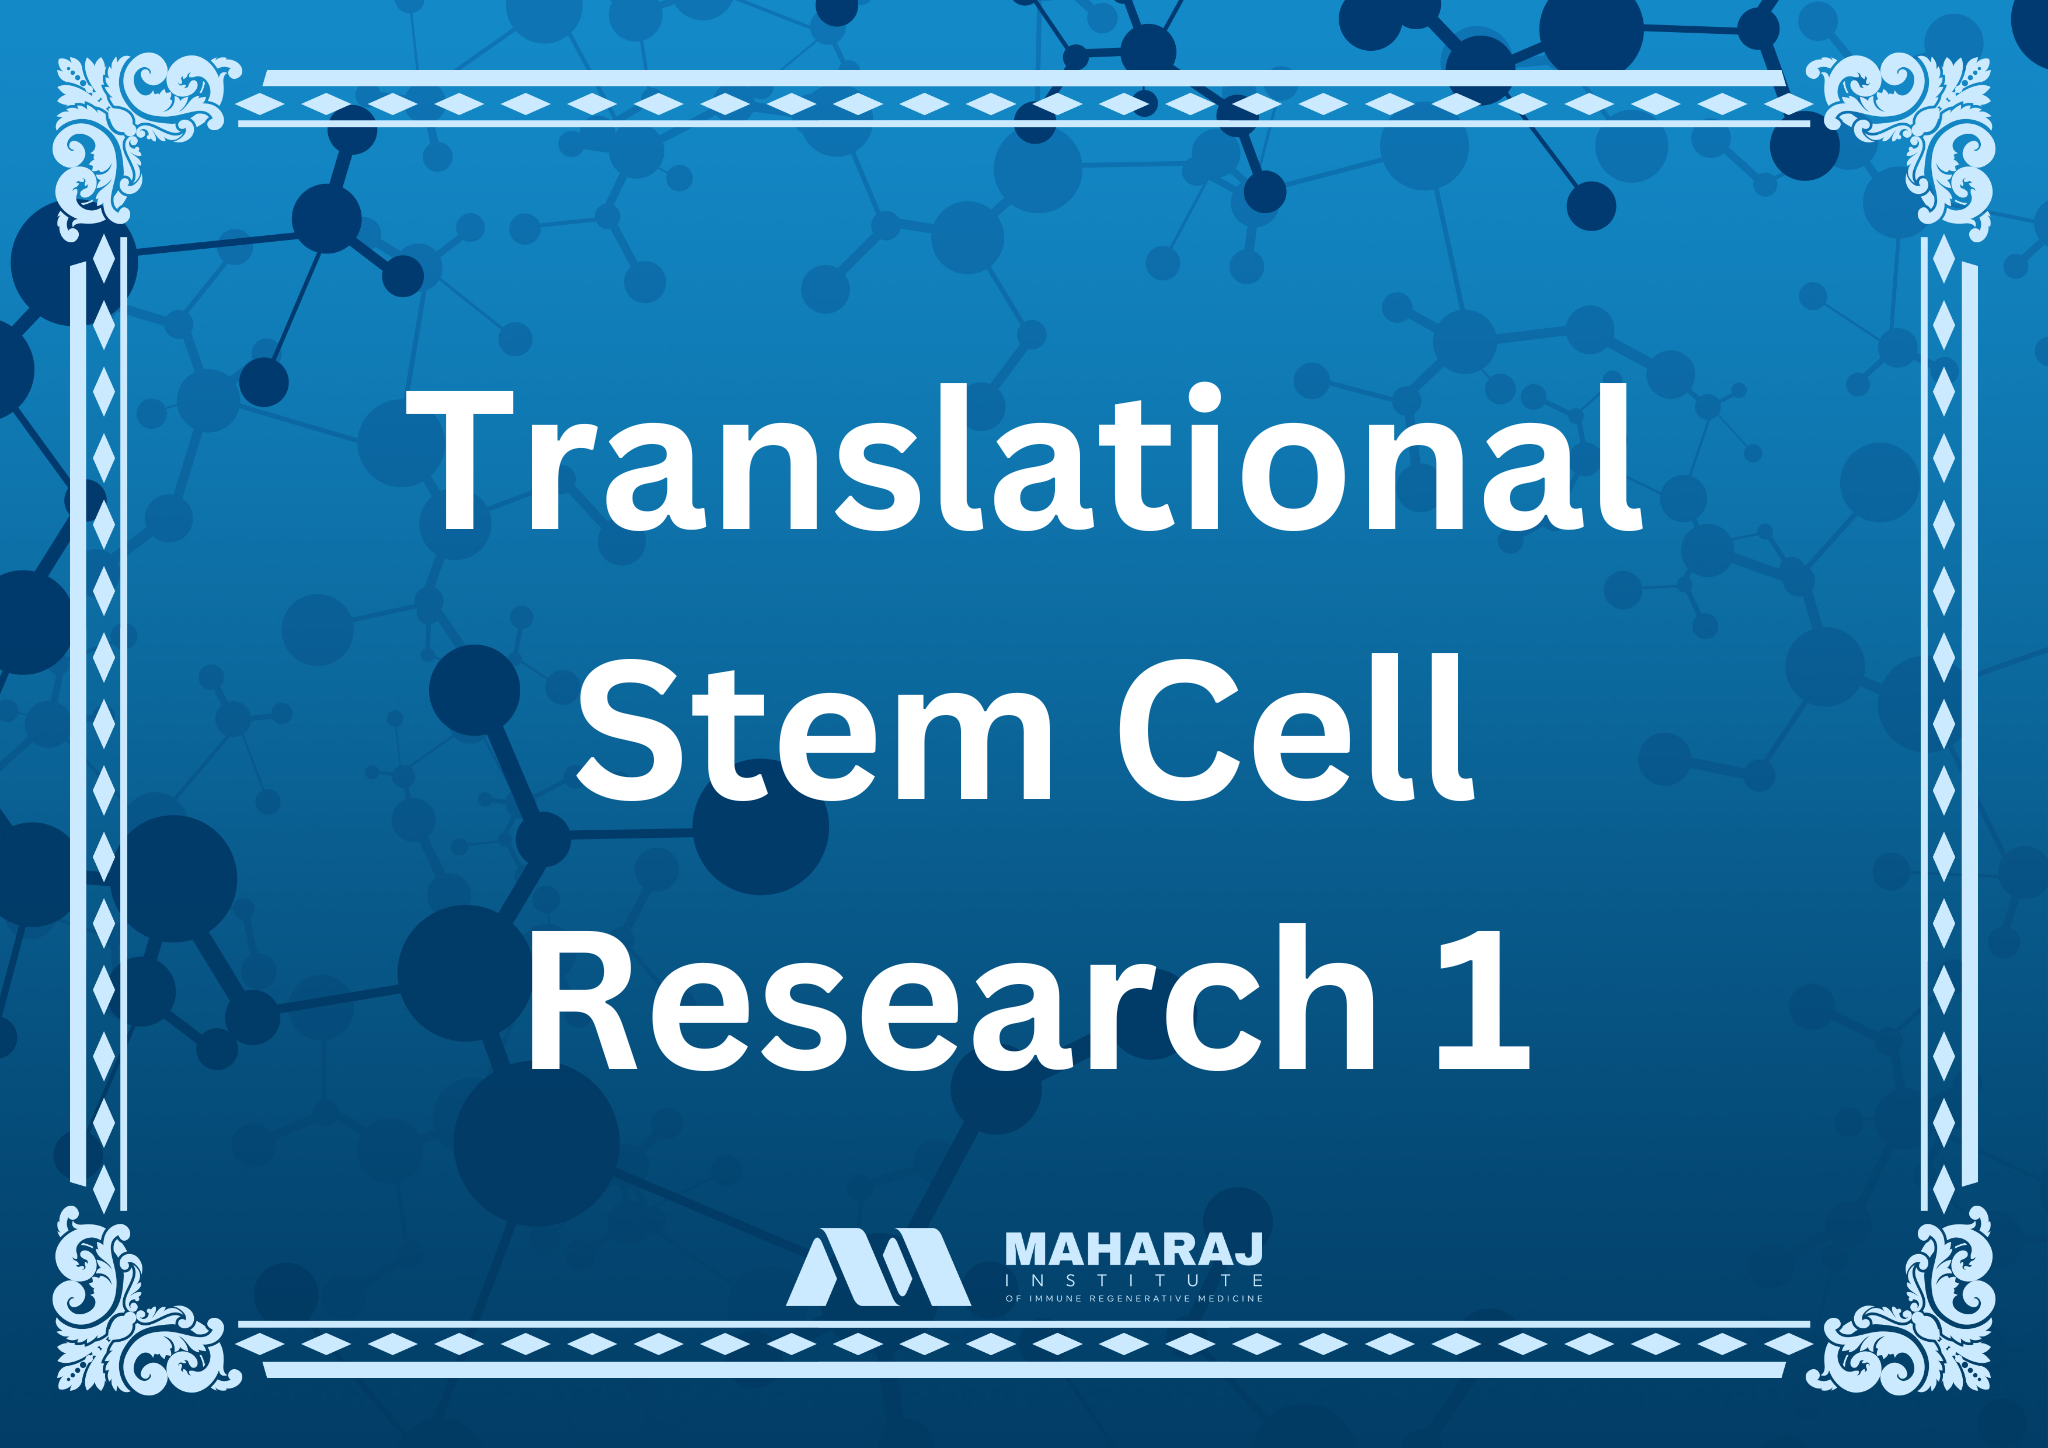 Translational Stem Cell Research 1